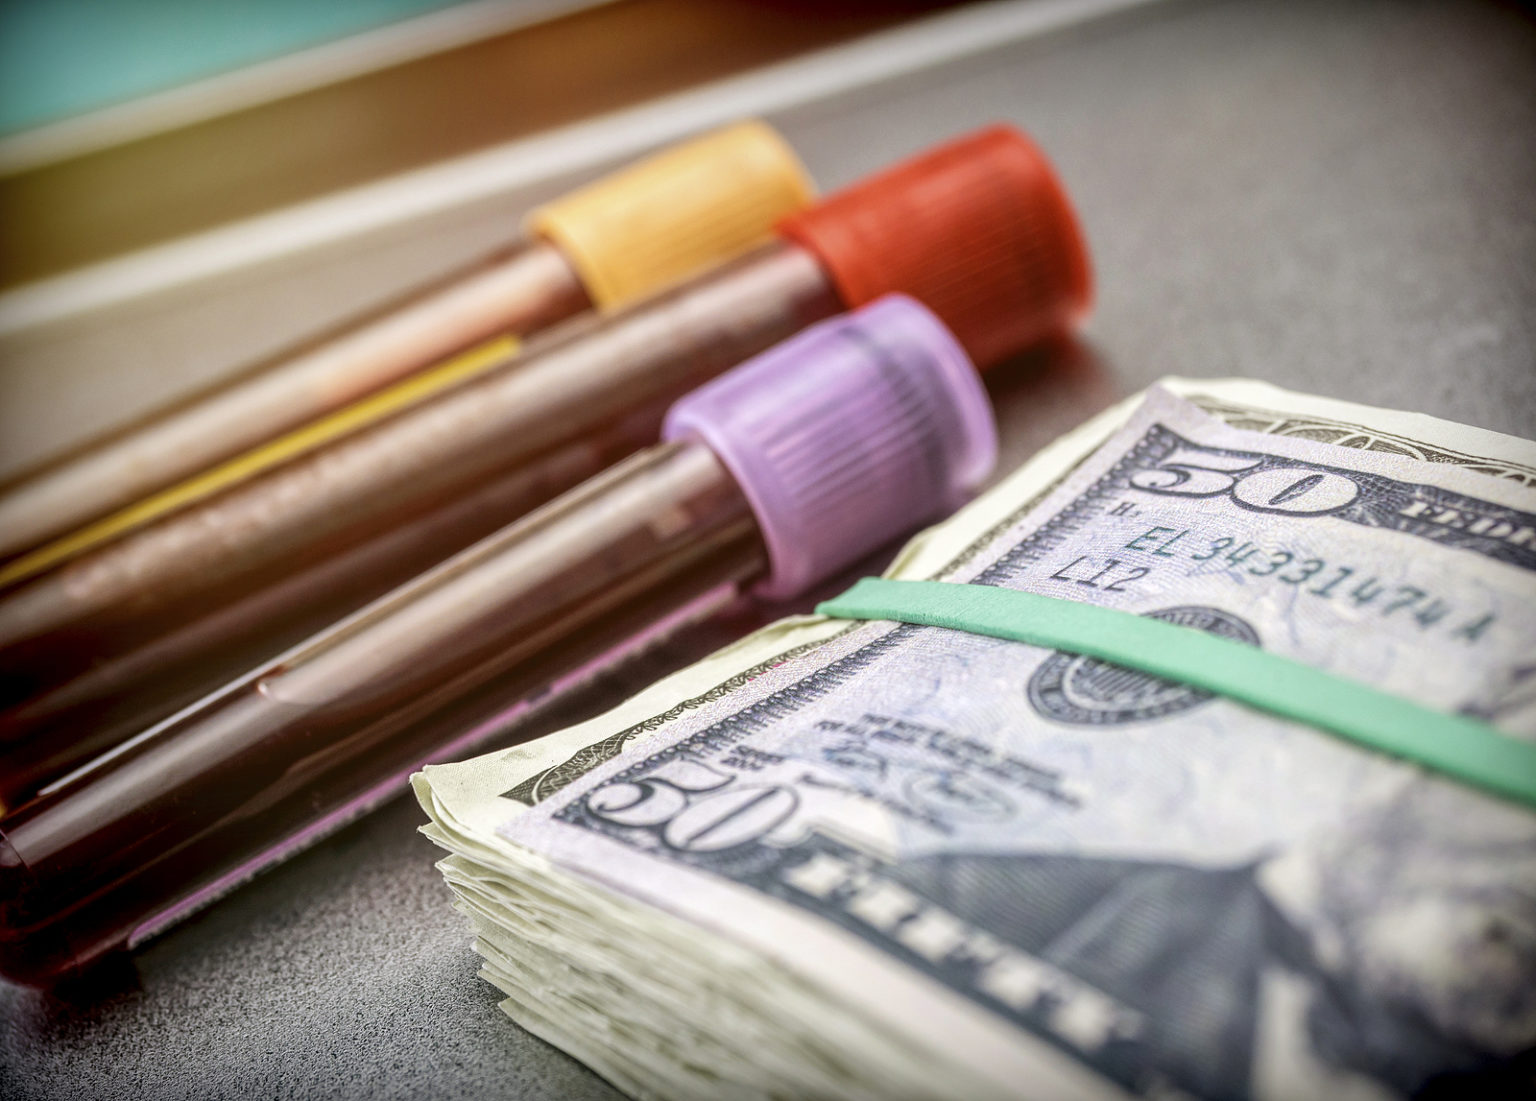 Phlebotomist Salary What Can You Expect to Earn in Your Area